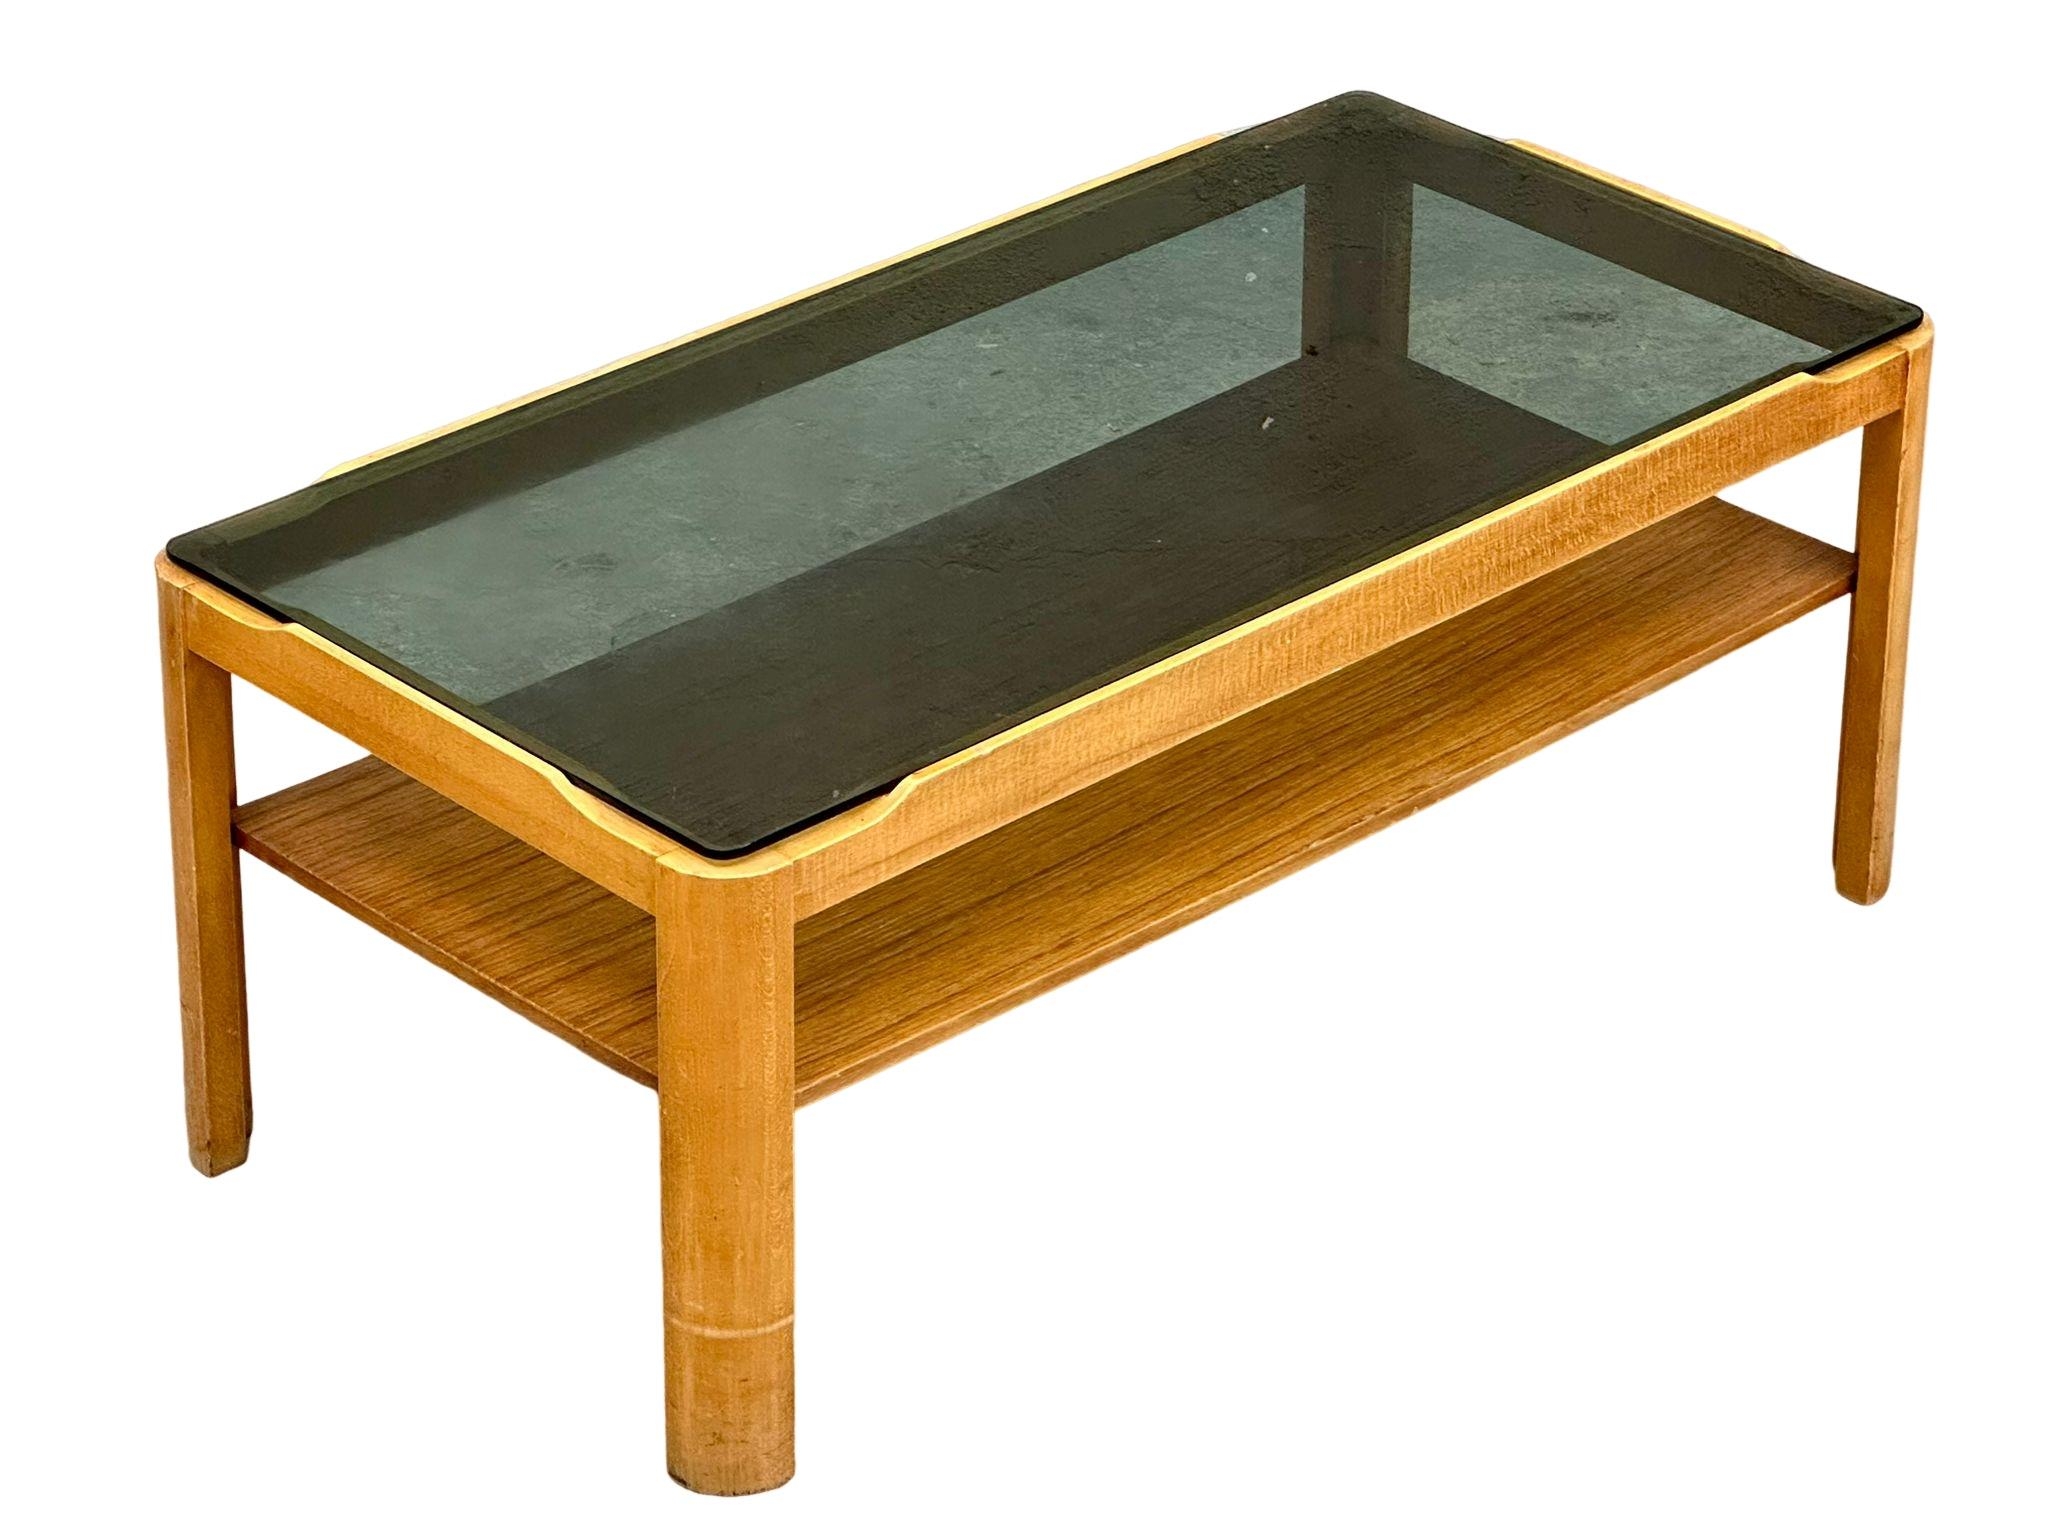 A Mid Century teak coffee table with smoked glass top by Myer. 88x44x35cm - Image 2 of 2